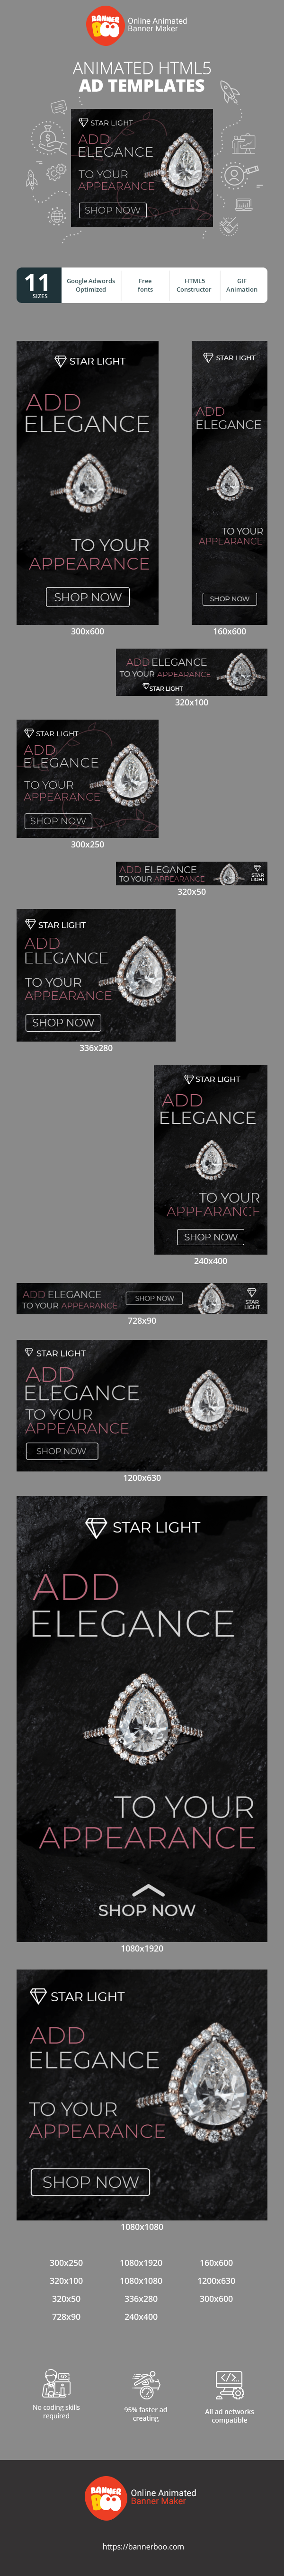 Banner ad template — Add Elegance To Your Appearance — Jewelry Store